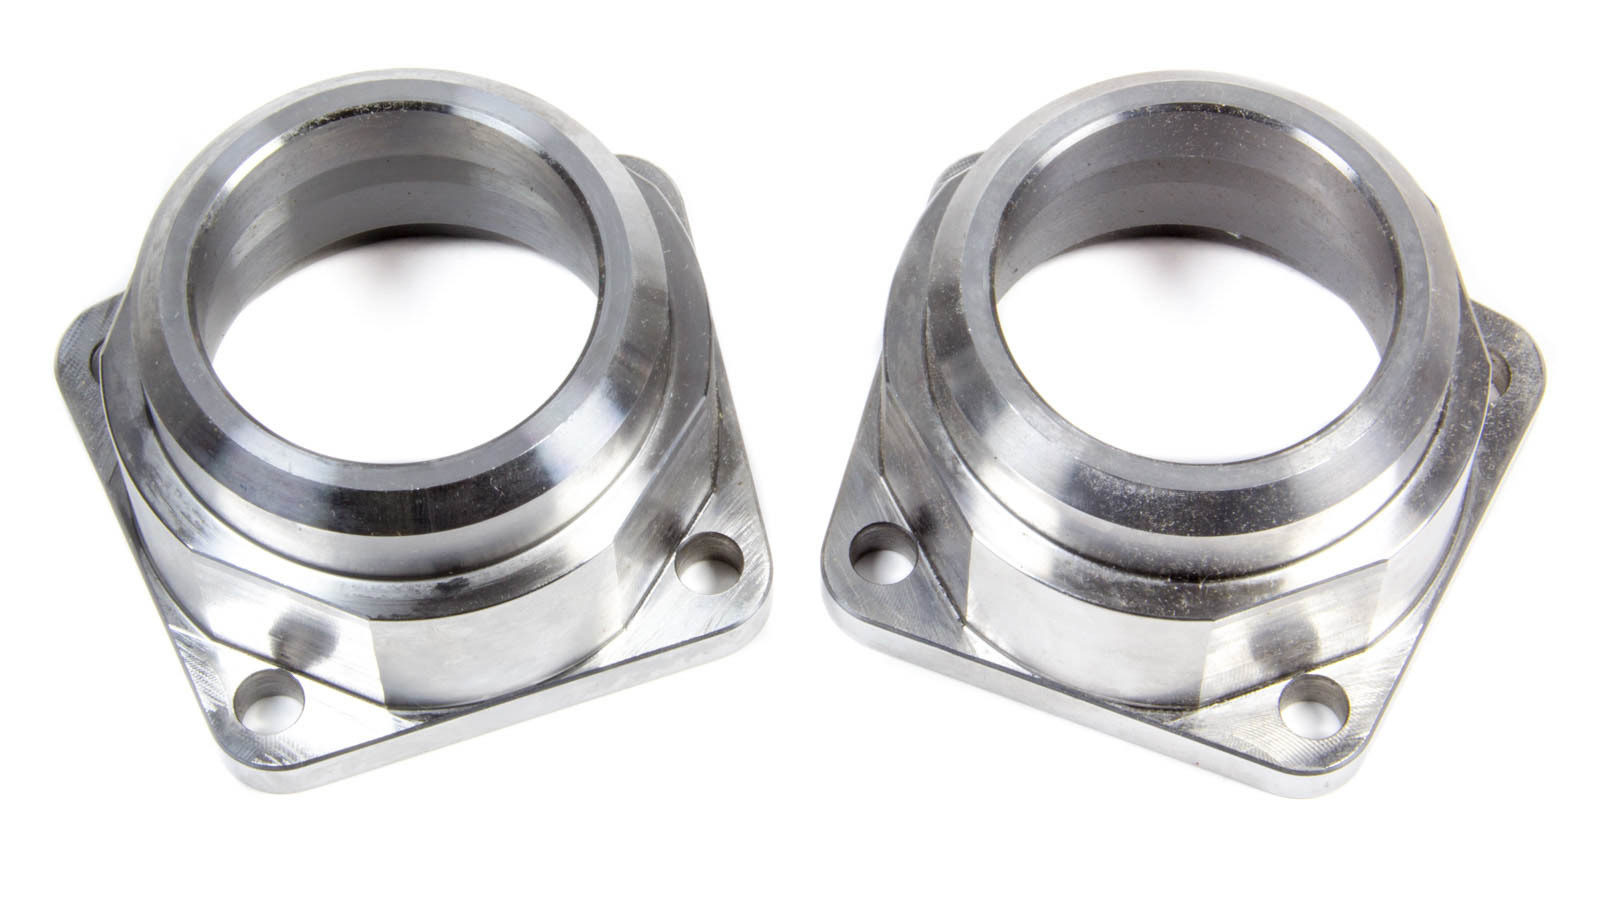 Moser Engineering 7900 Axle Housing End, Weld-On, 3.150 in Bearing Bore, Steel, Natural, Big Ford Bearing, Chevy Car, Pair